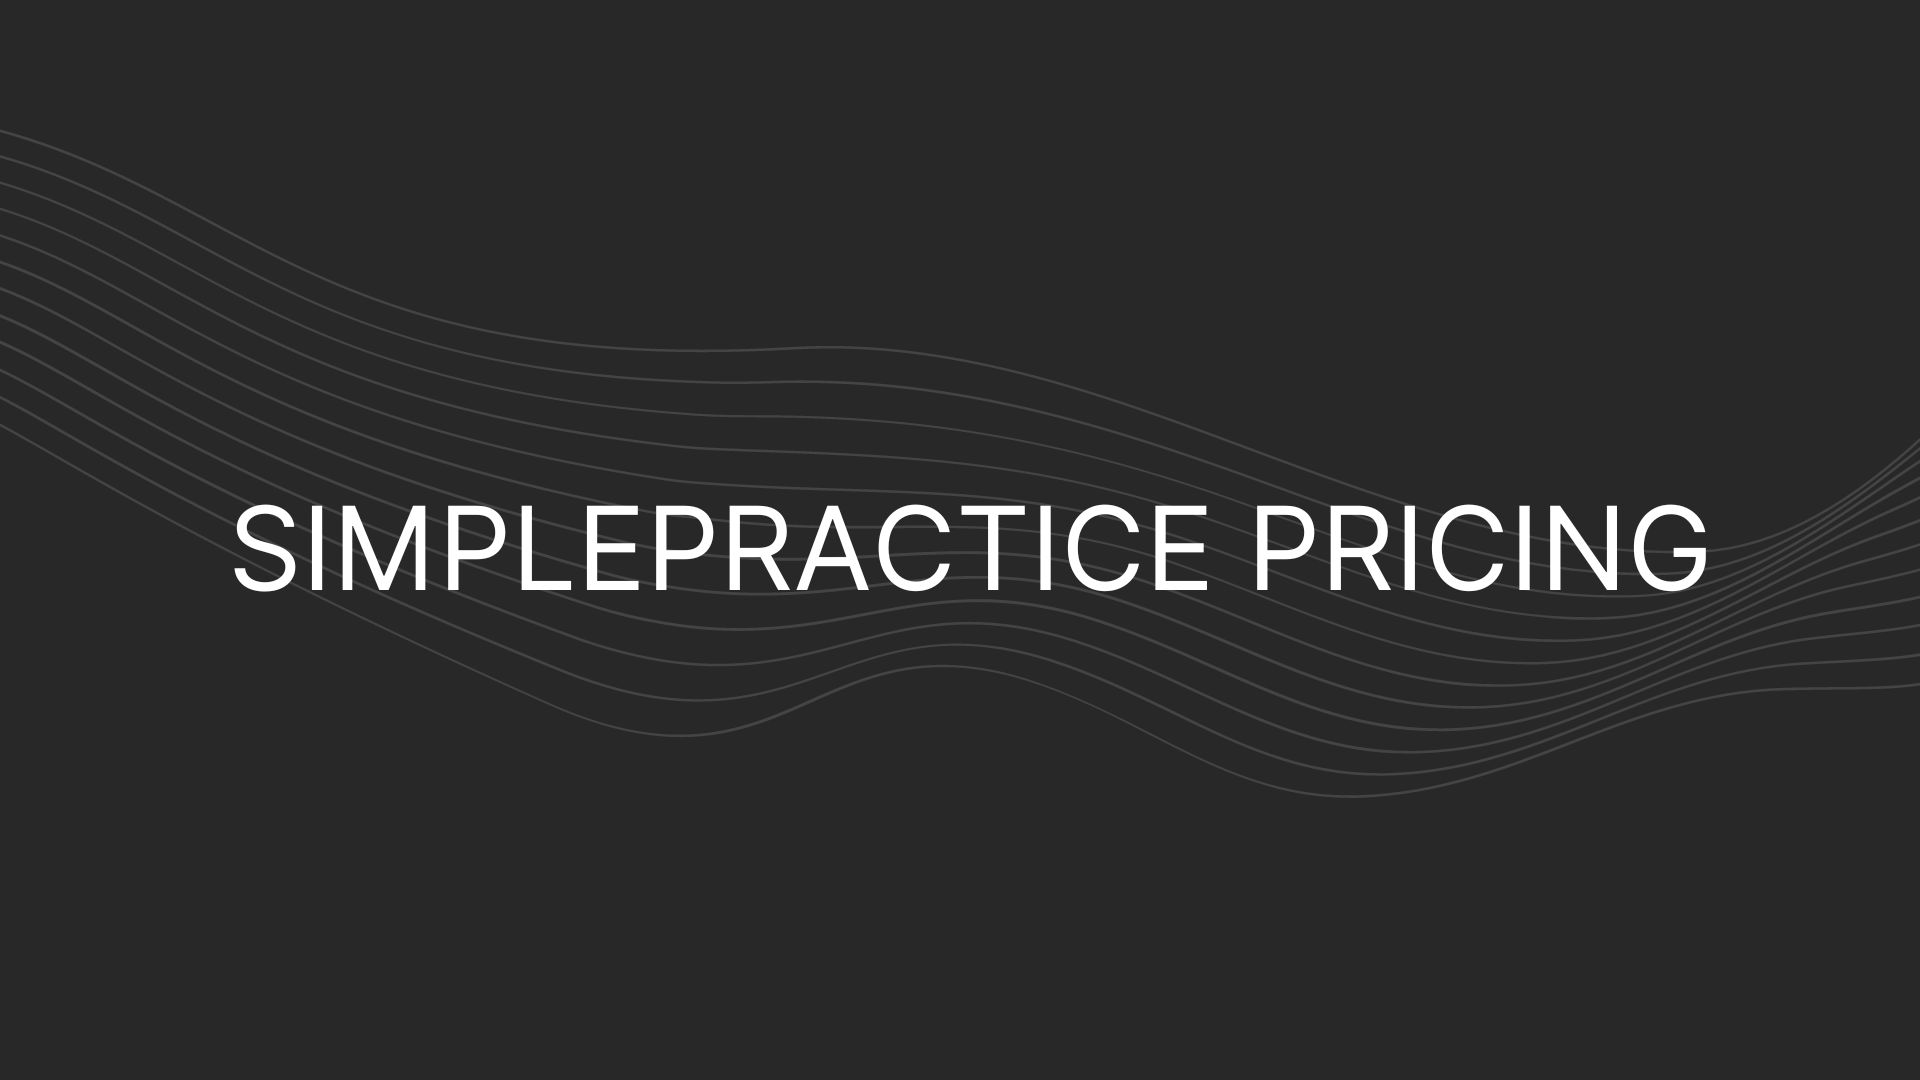 SimplePractice Pricing